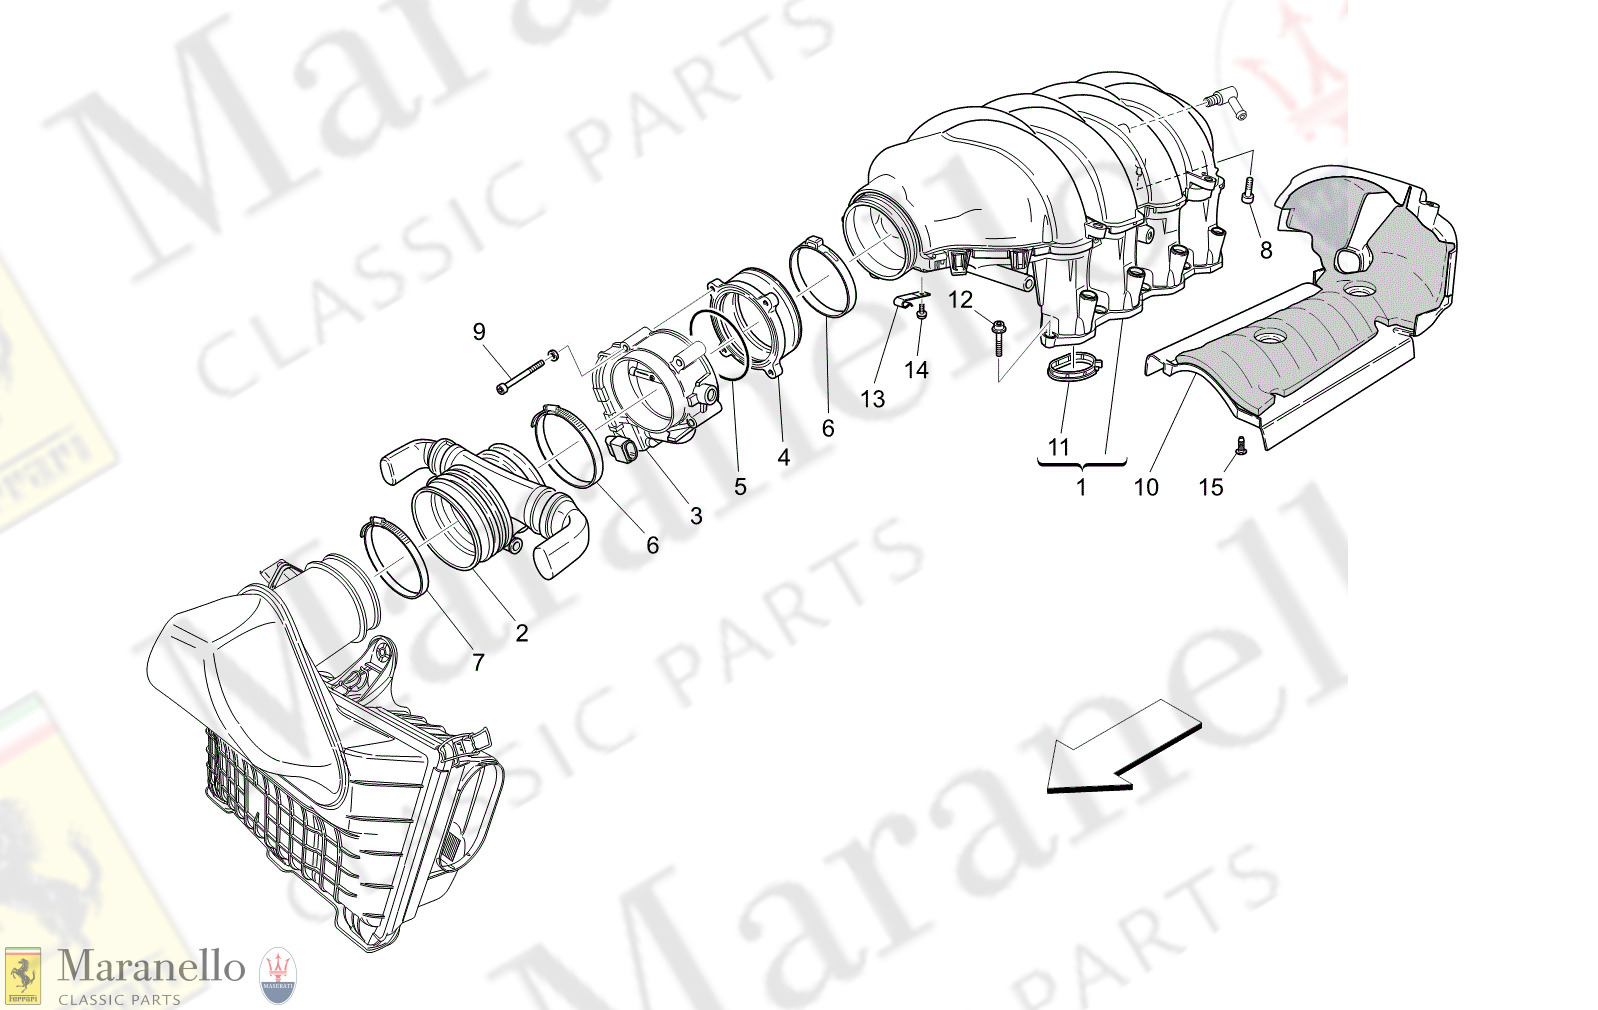 01.40 - 12 - 0140 - 12 Intake Manifold And Throttle Body